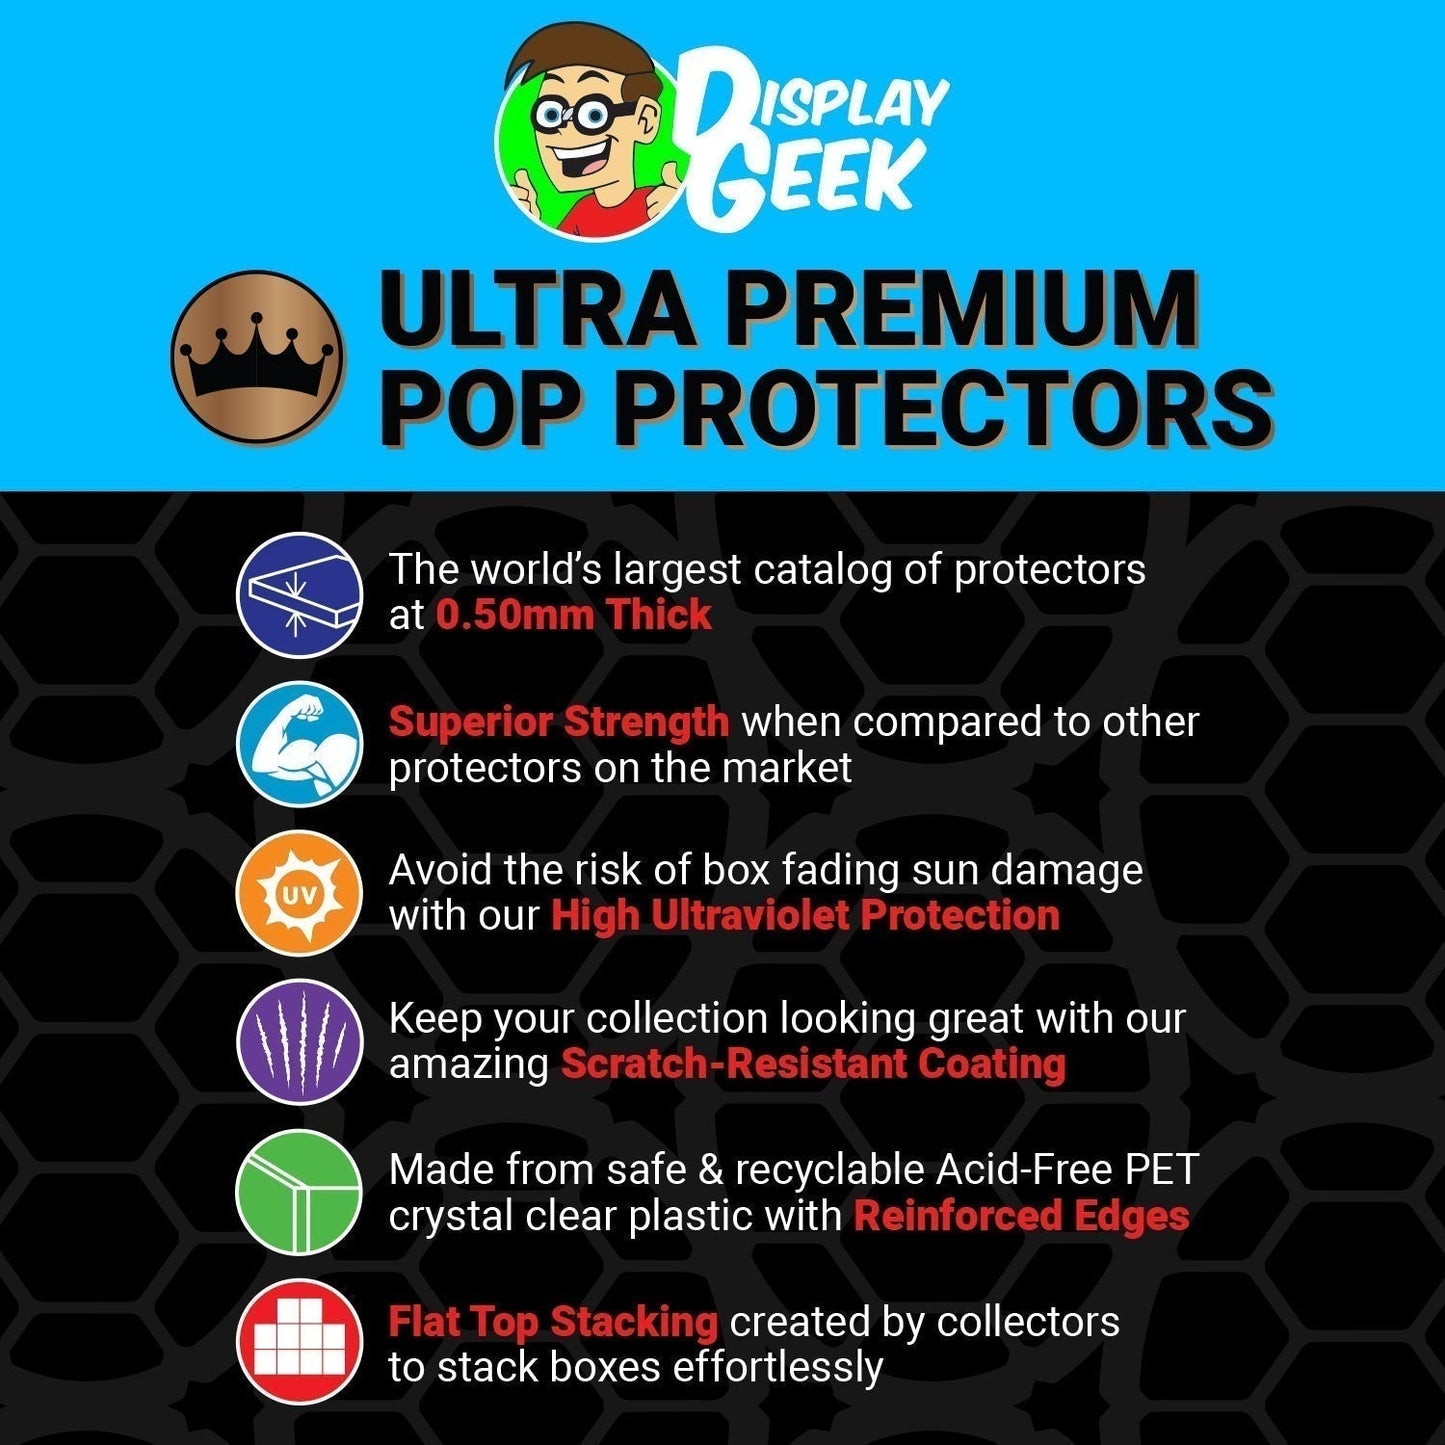 Pop Protector for Queen Rhaenyra with Syrax #305 Funko Pop Rides on The Protector Guide App by Display Geek